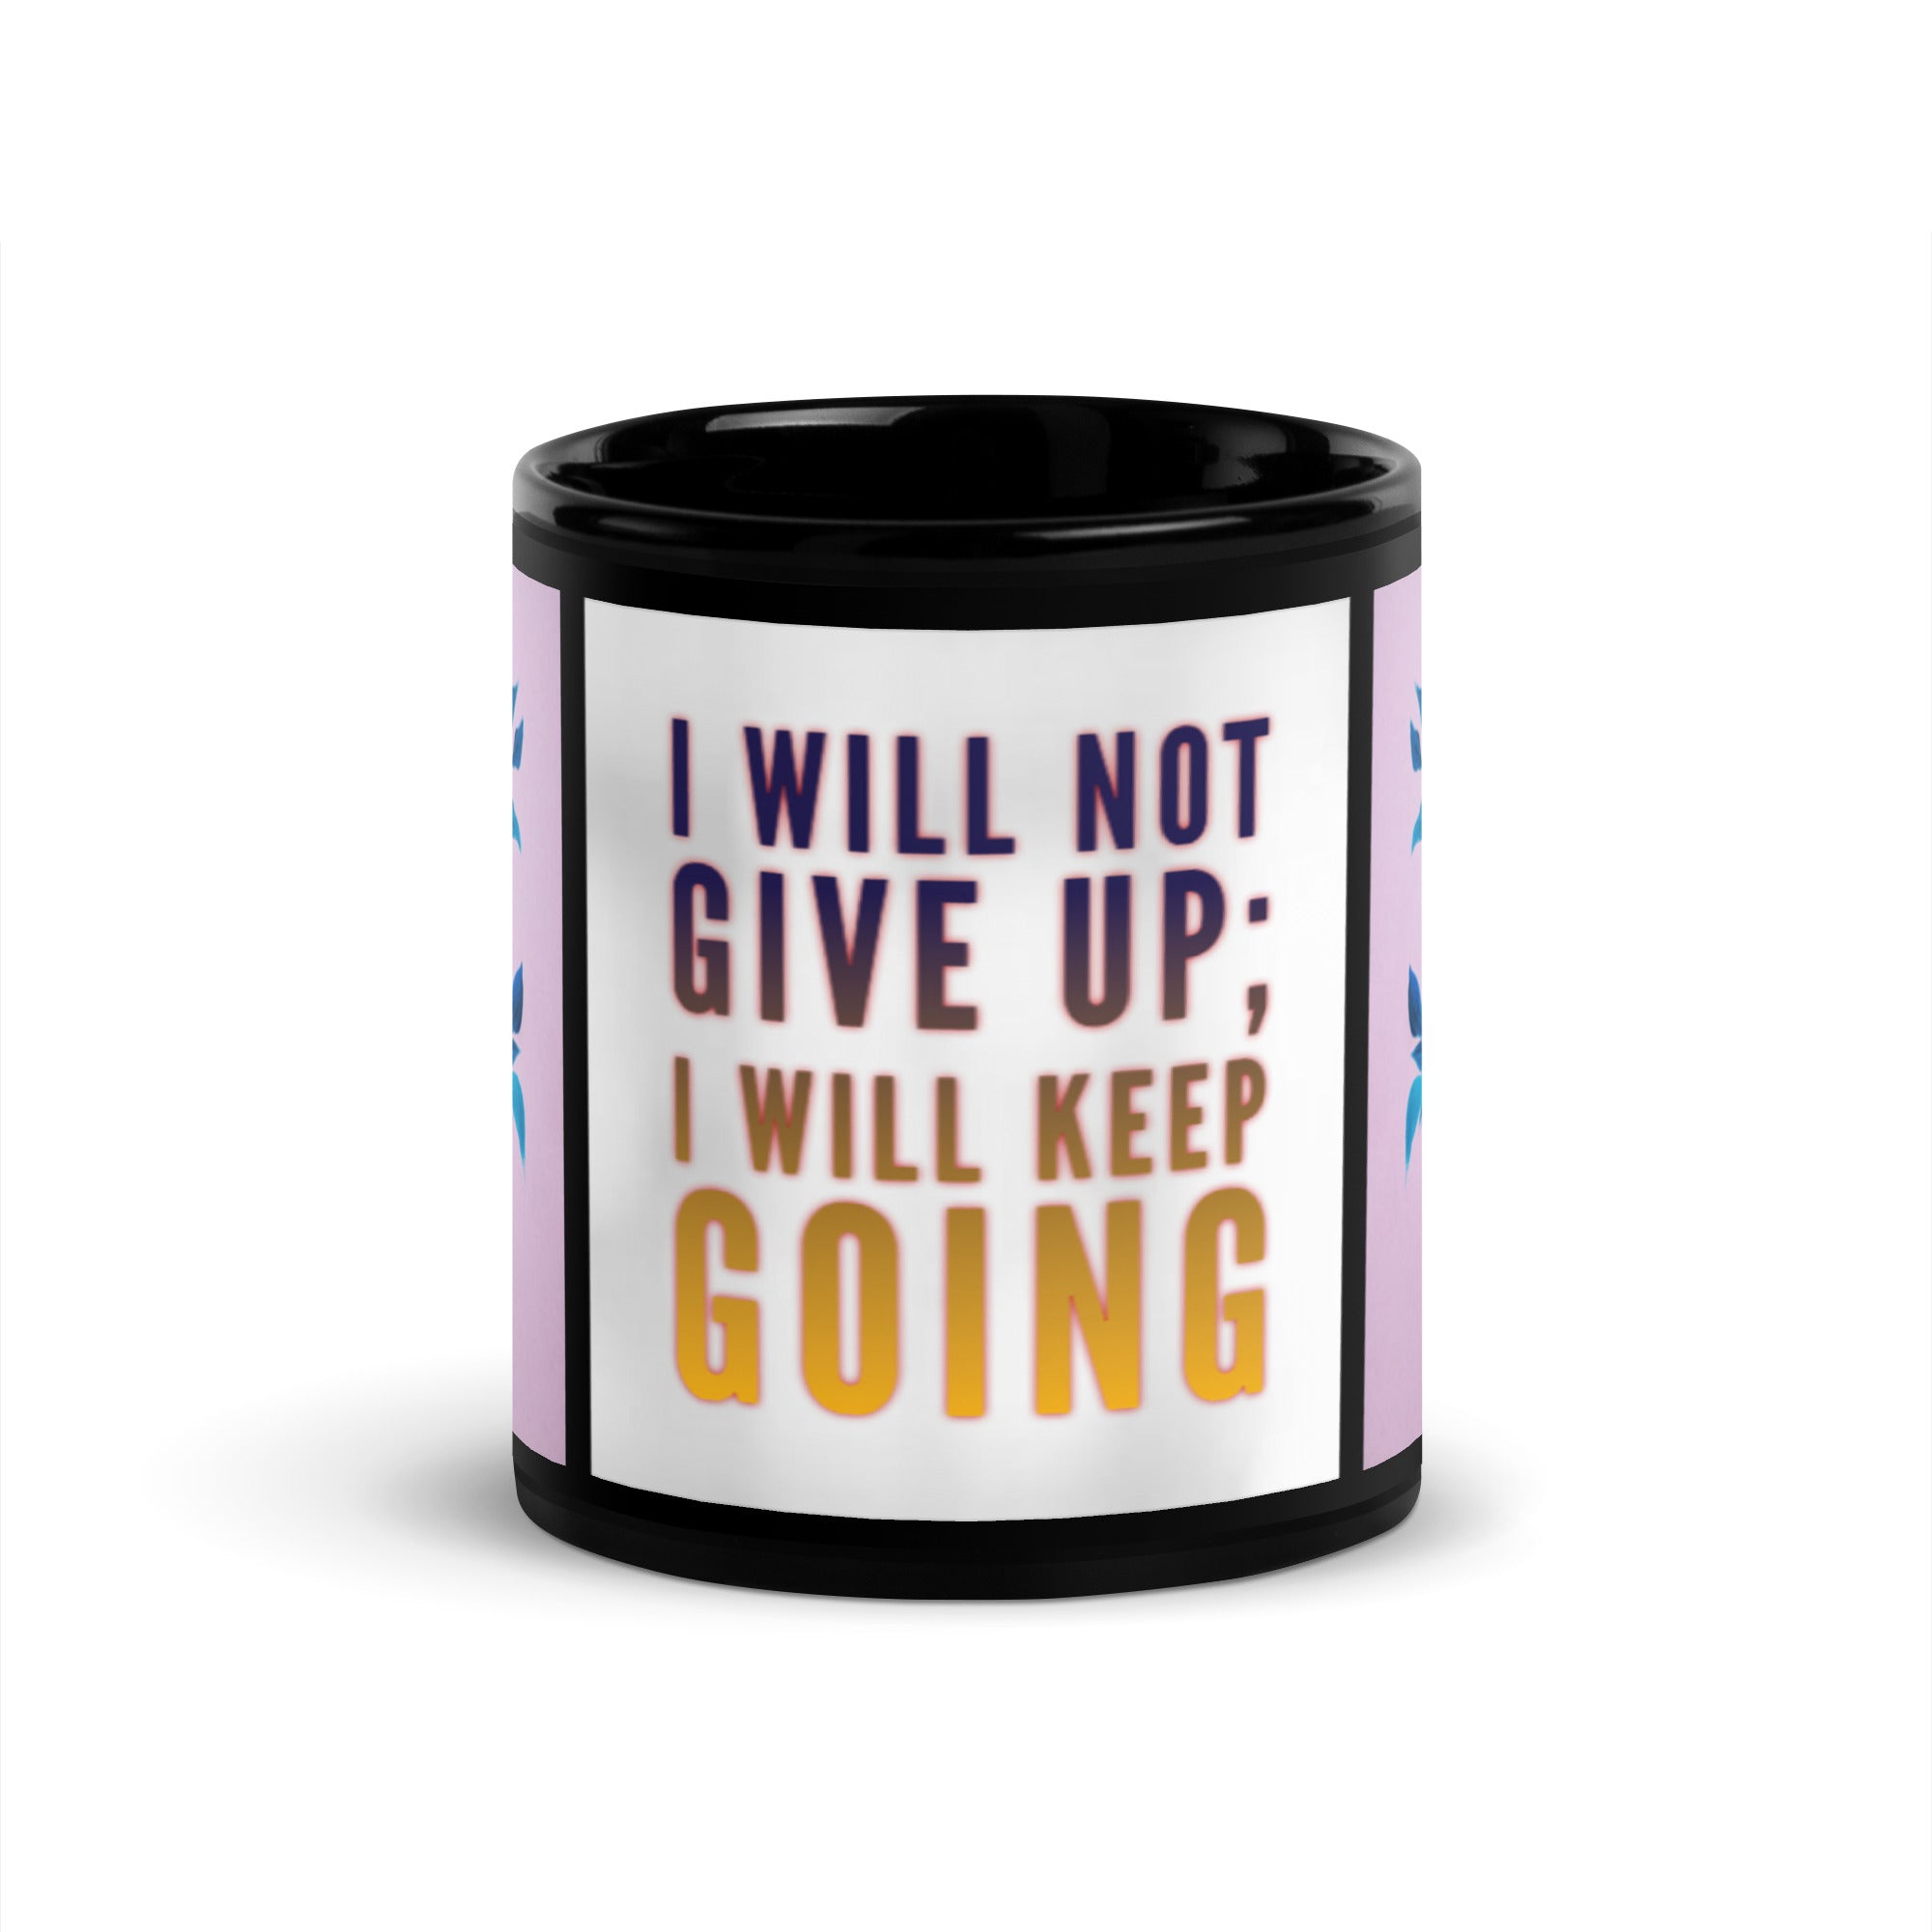 GloWell Designs - Black Glossy Mug - Affirmation Quote - I Will Not Give Up - GloWell Designs